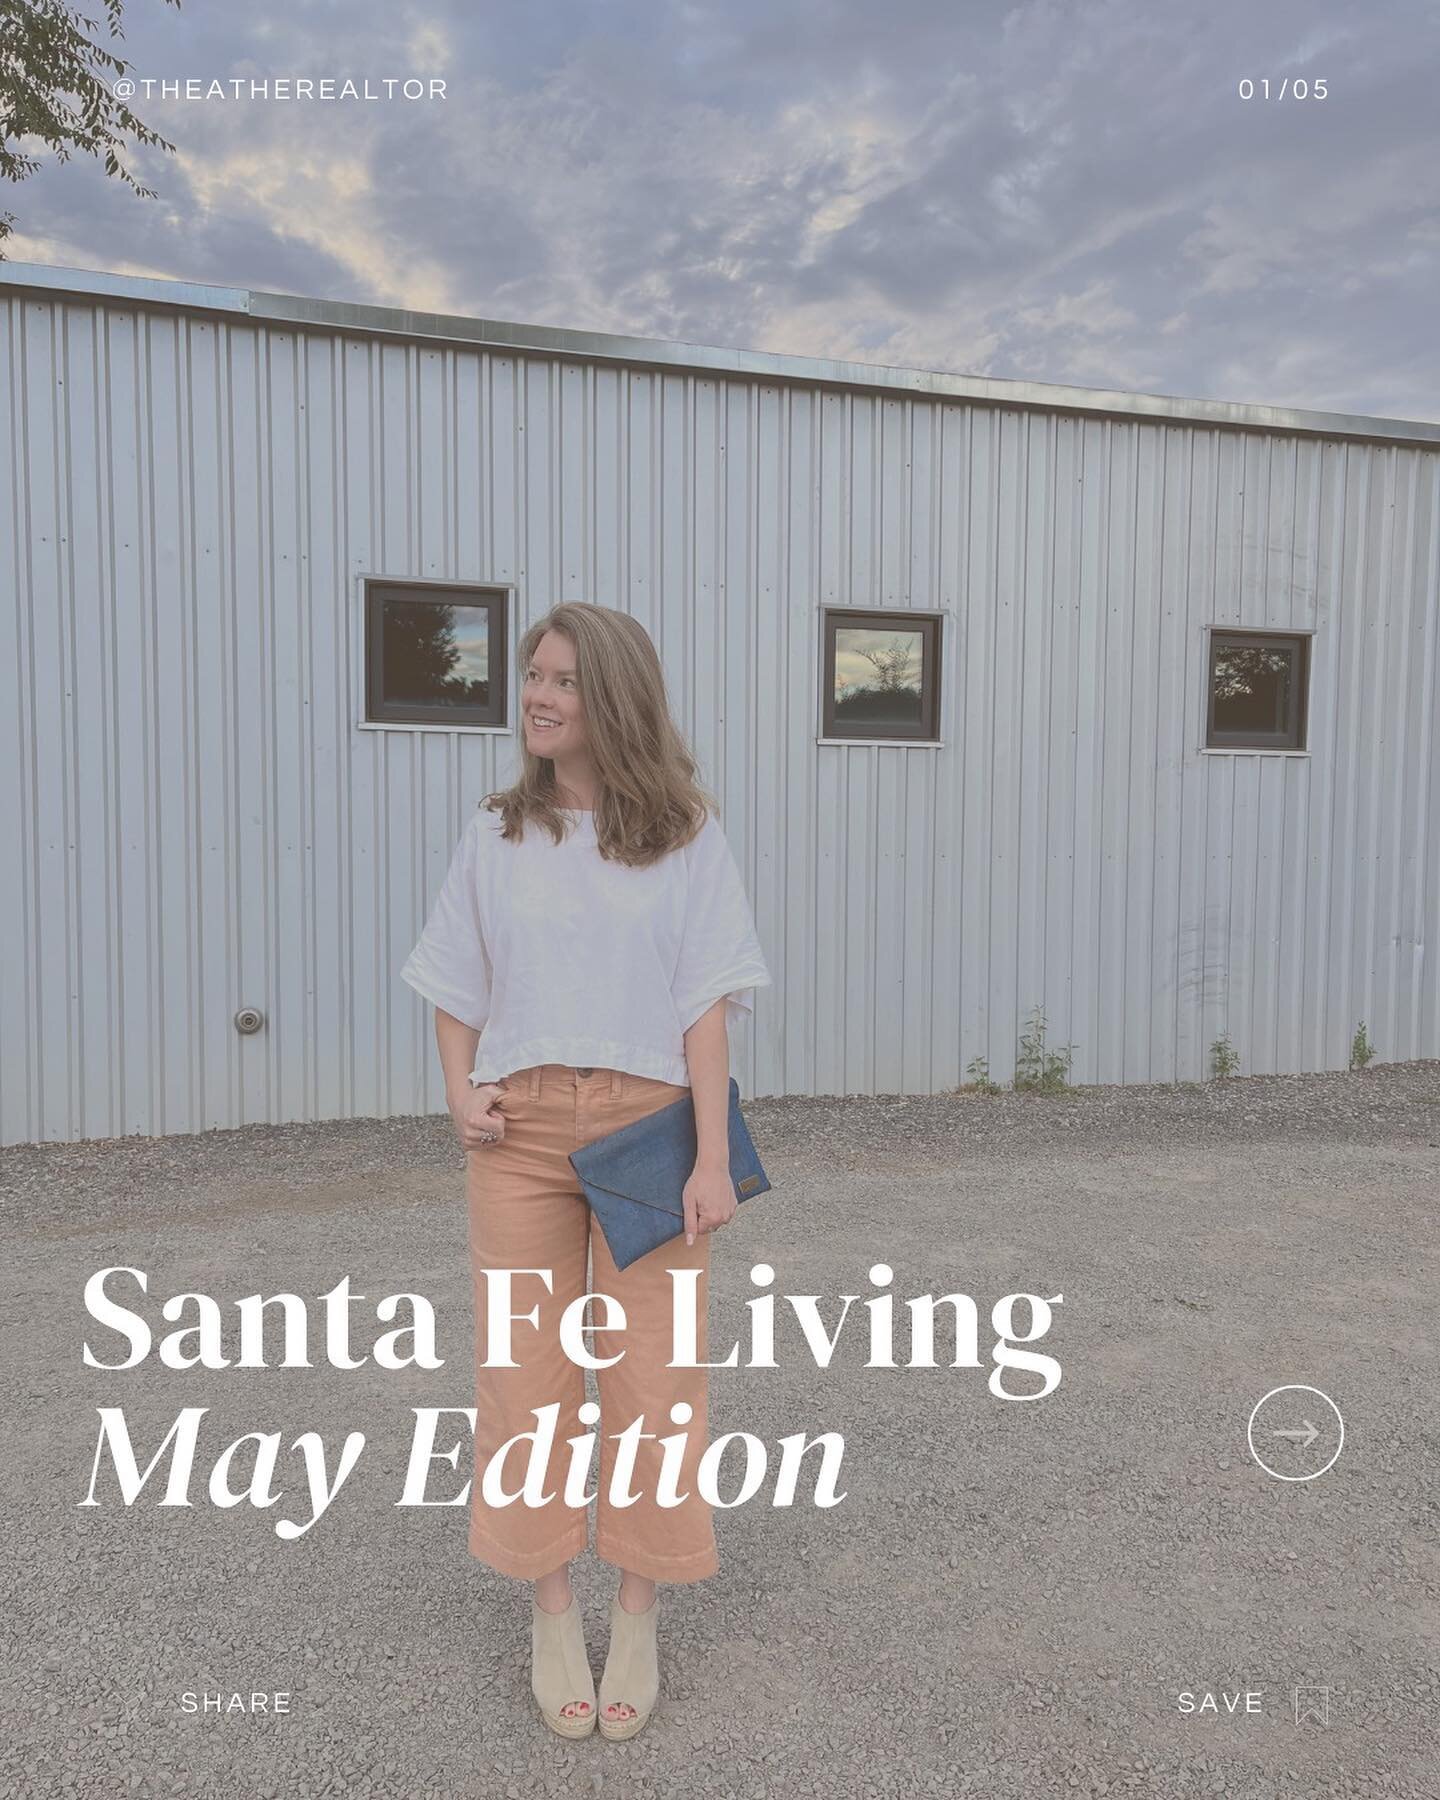 It's mid-month already?! Wowza. 

As a Santa Fe resident, I love highlighting all the amazing events and happenings in our community. If I missed anything, let me know in the comments below!

By the way, did you know that May is National Home Improve